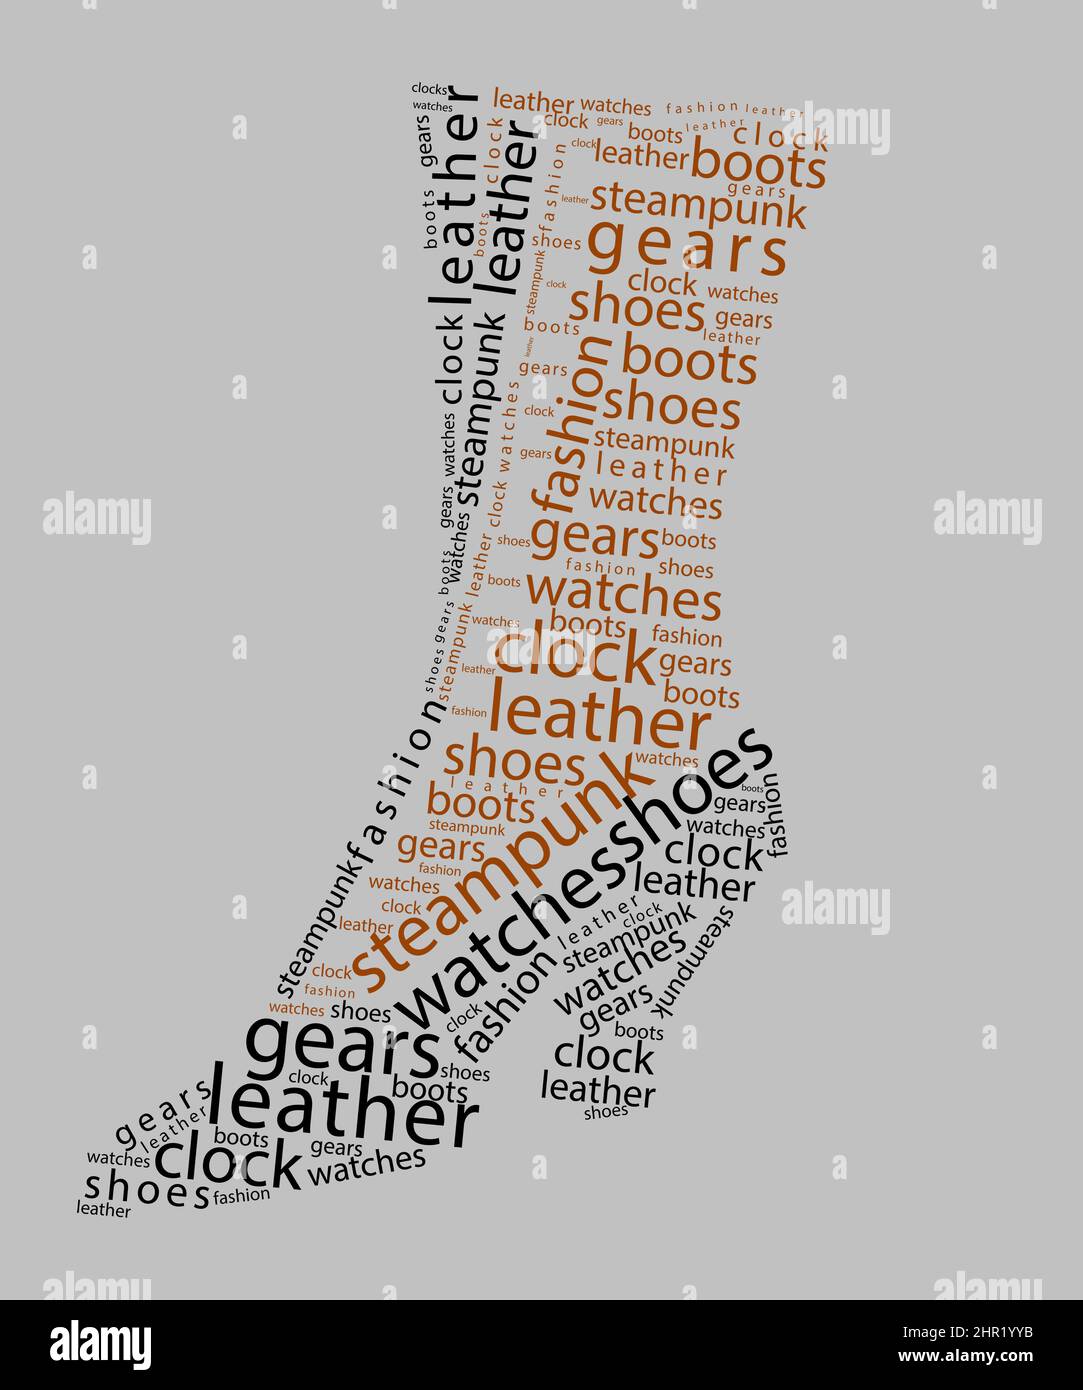 Steampunk boot word cloud where sci fi meets vintage, with a Victorian book and fashion words like: boot, shoes, gears, leather, watches. Stock Photo